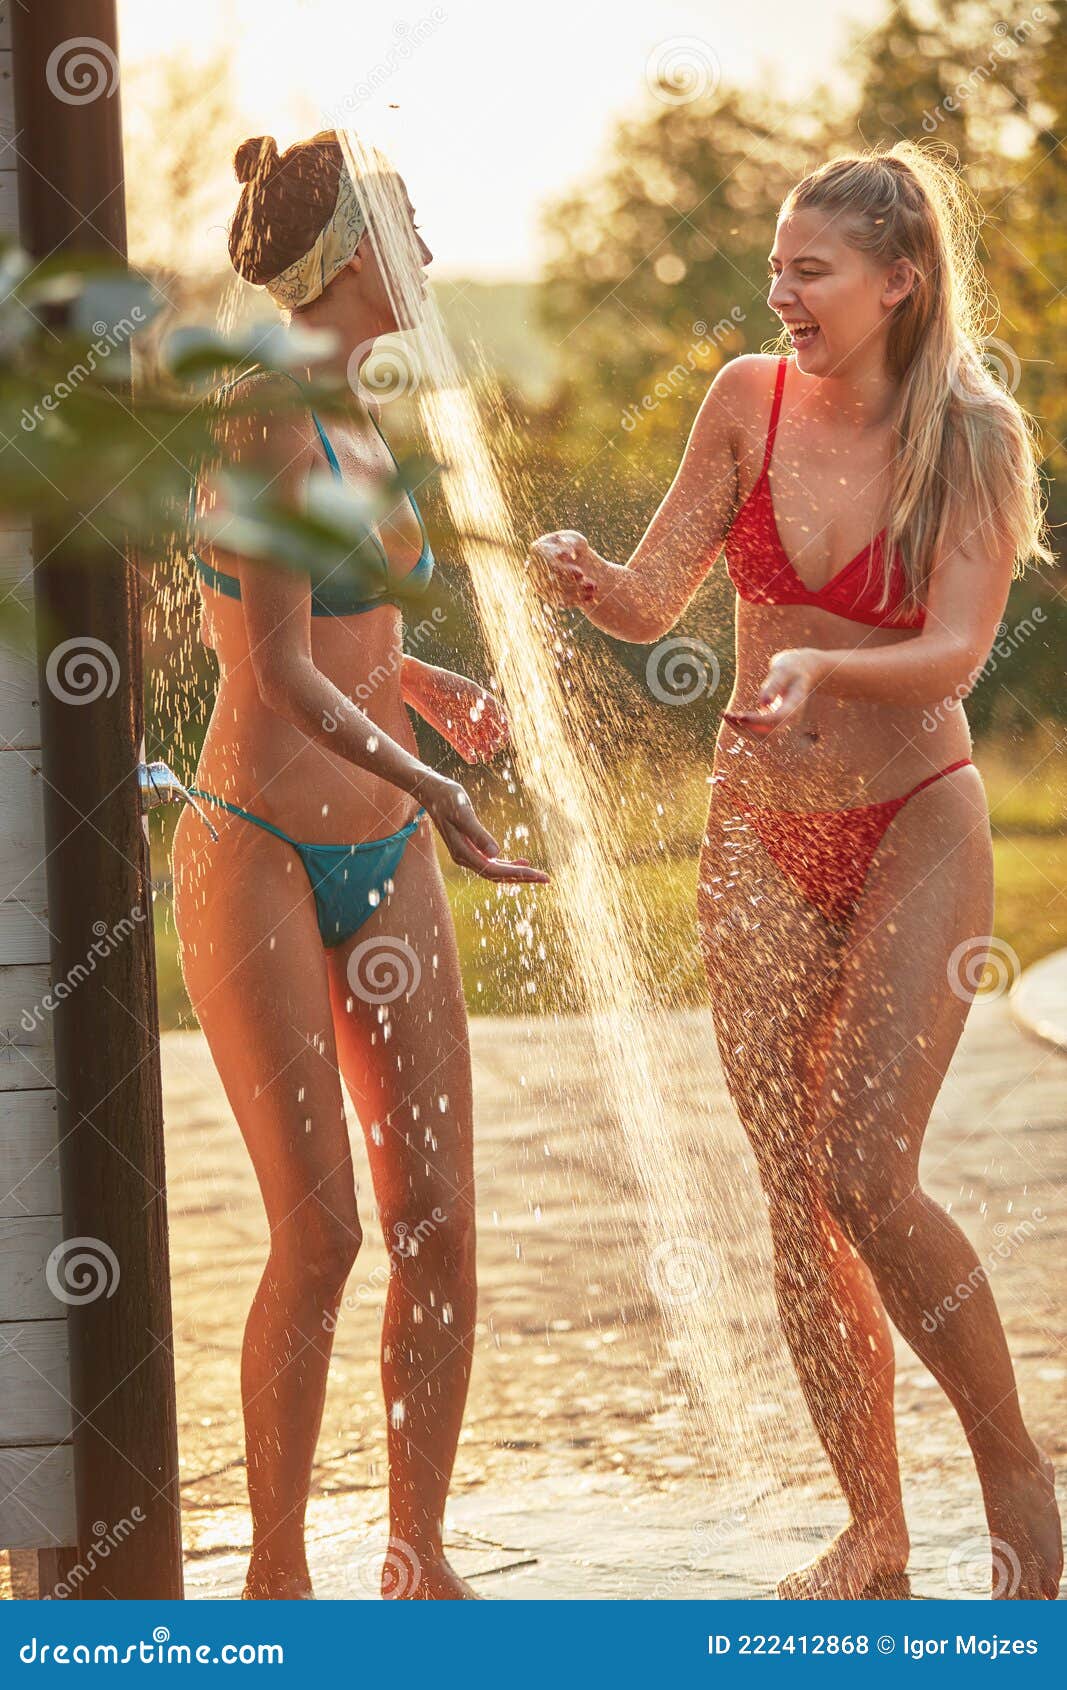 two girls showering together